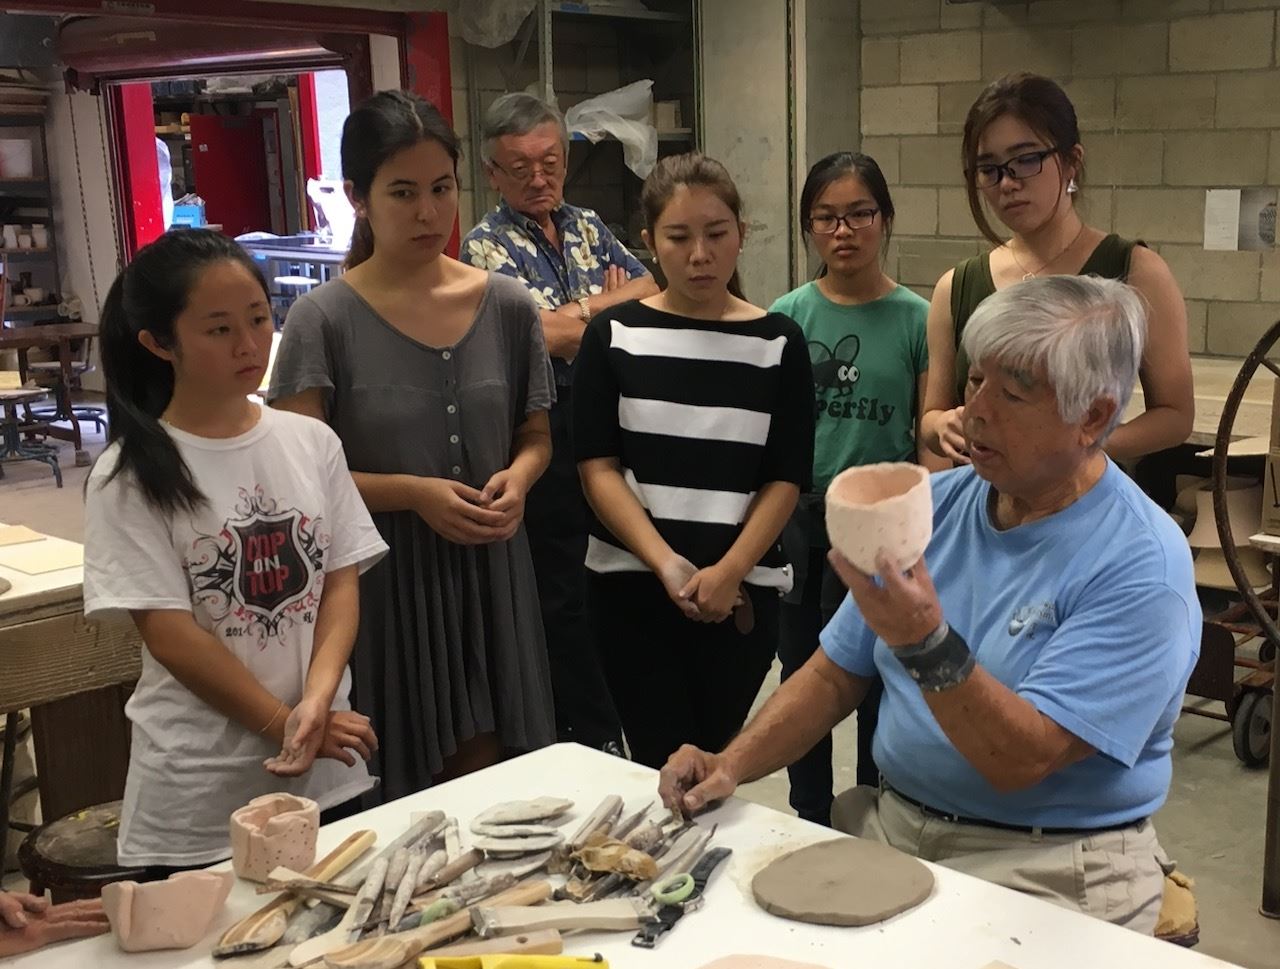 Previous Tea Bowl Workshop attendees learning about the importance of crafting a tea bowl.